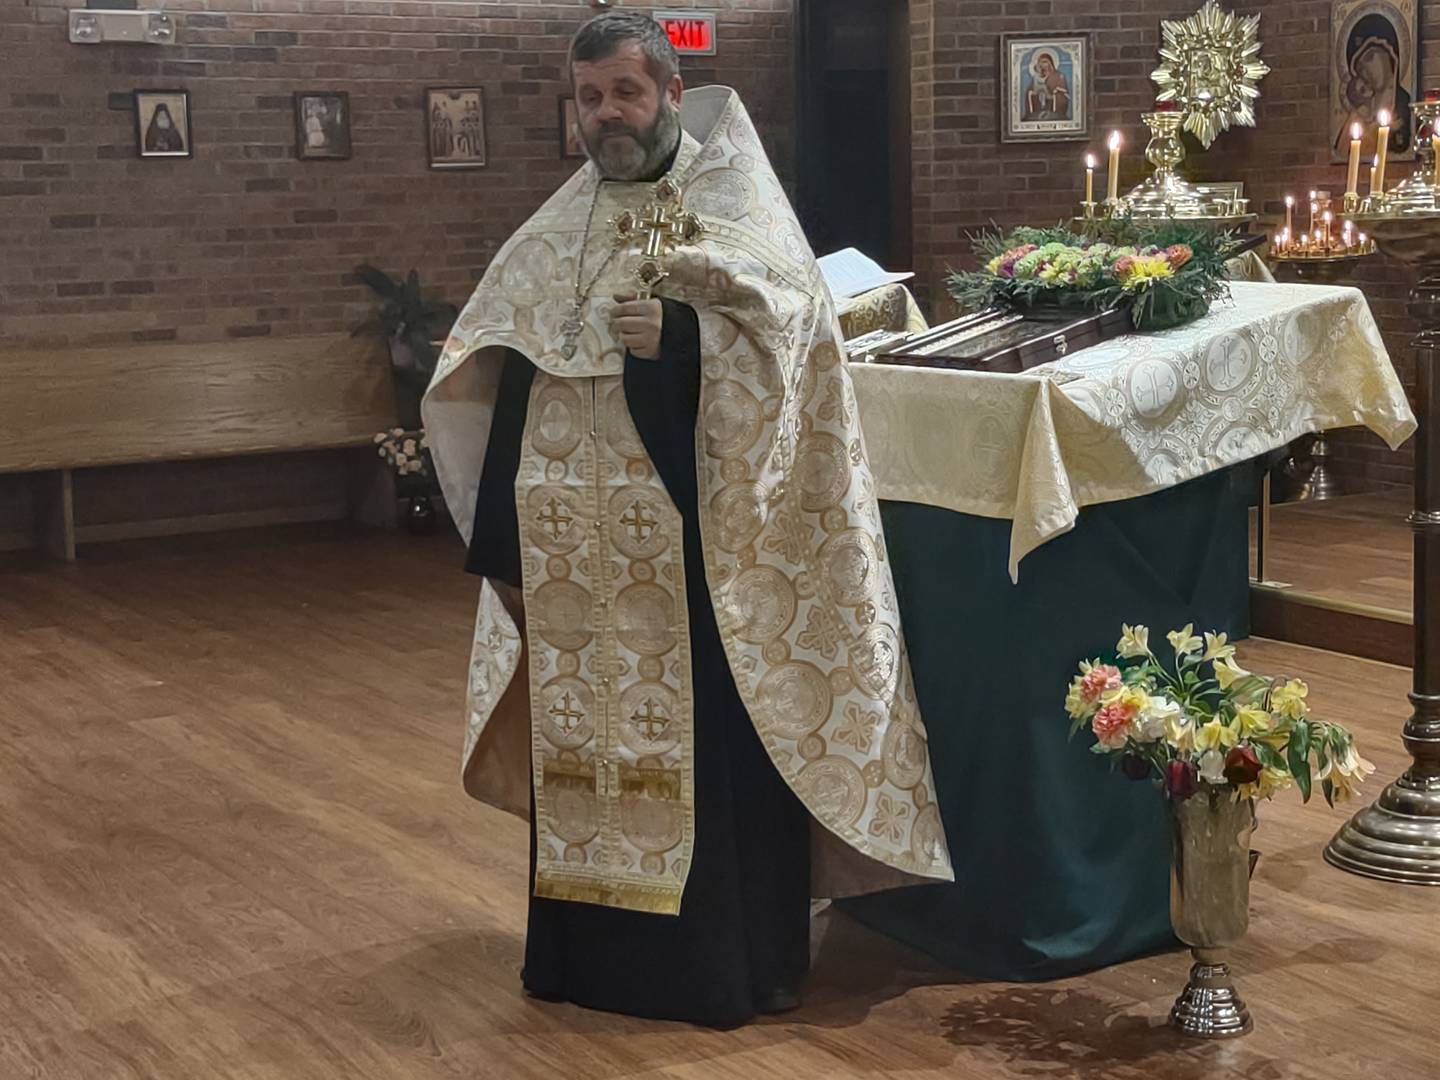 Father Vladimir Kovalchuk of St. Nicholas of Myra Russian Orthodox Church in McHenry was born in Ternopil and led prayers for peace in Ukraine during services on Thursday, Feb. 24, 2022.